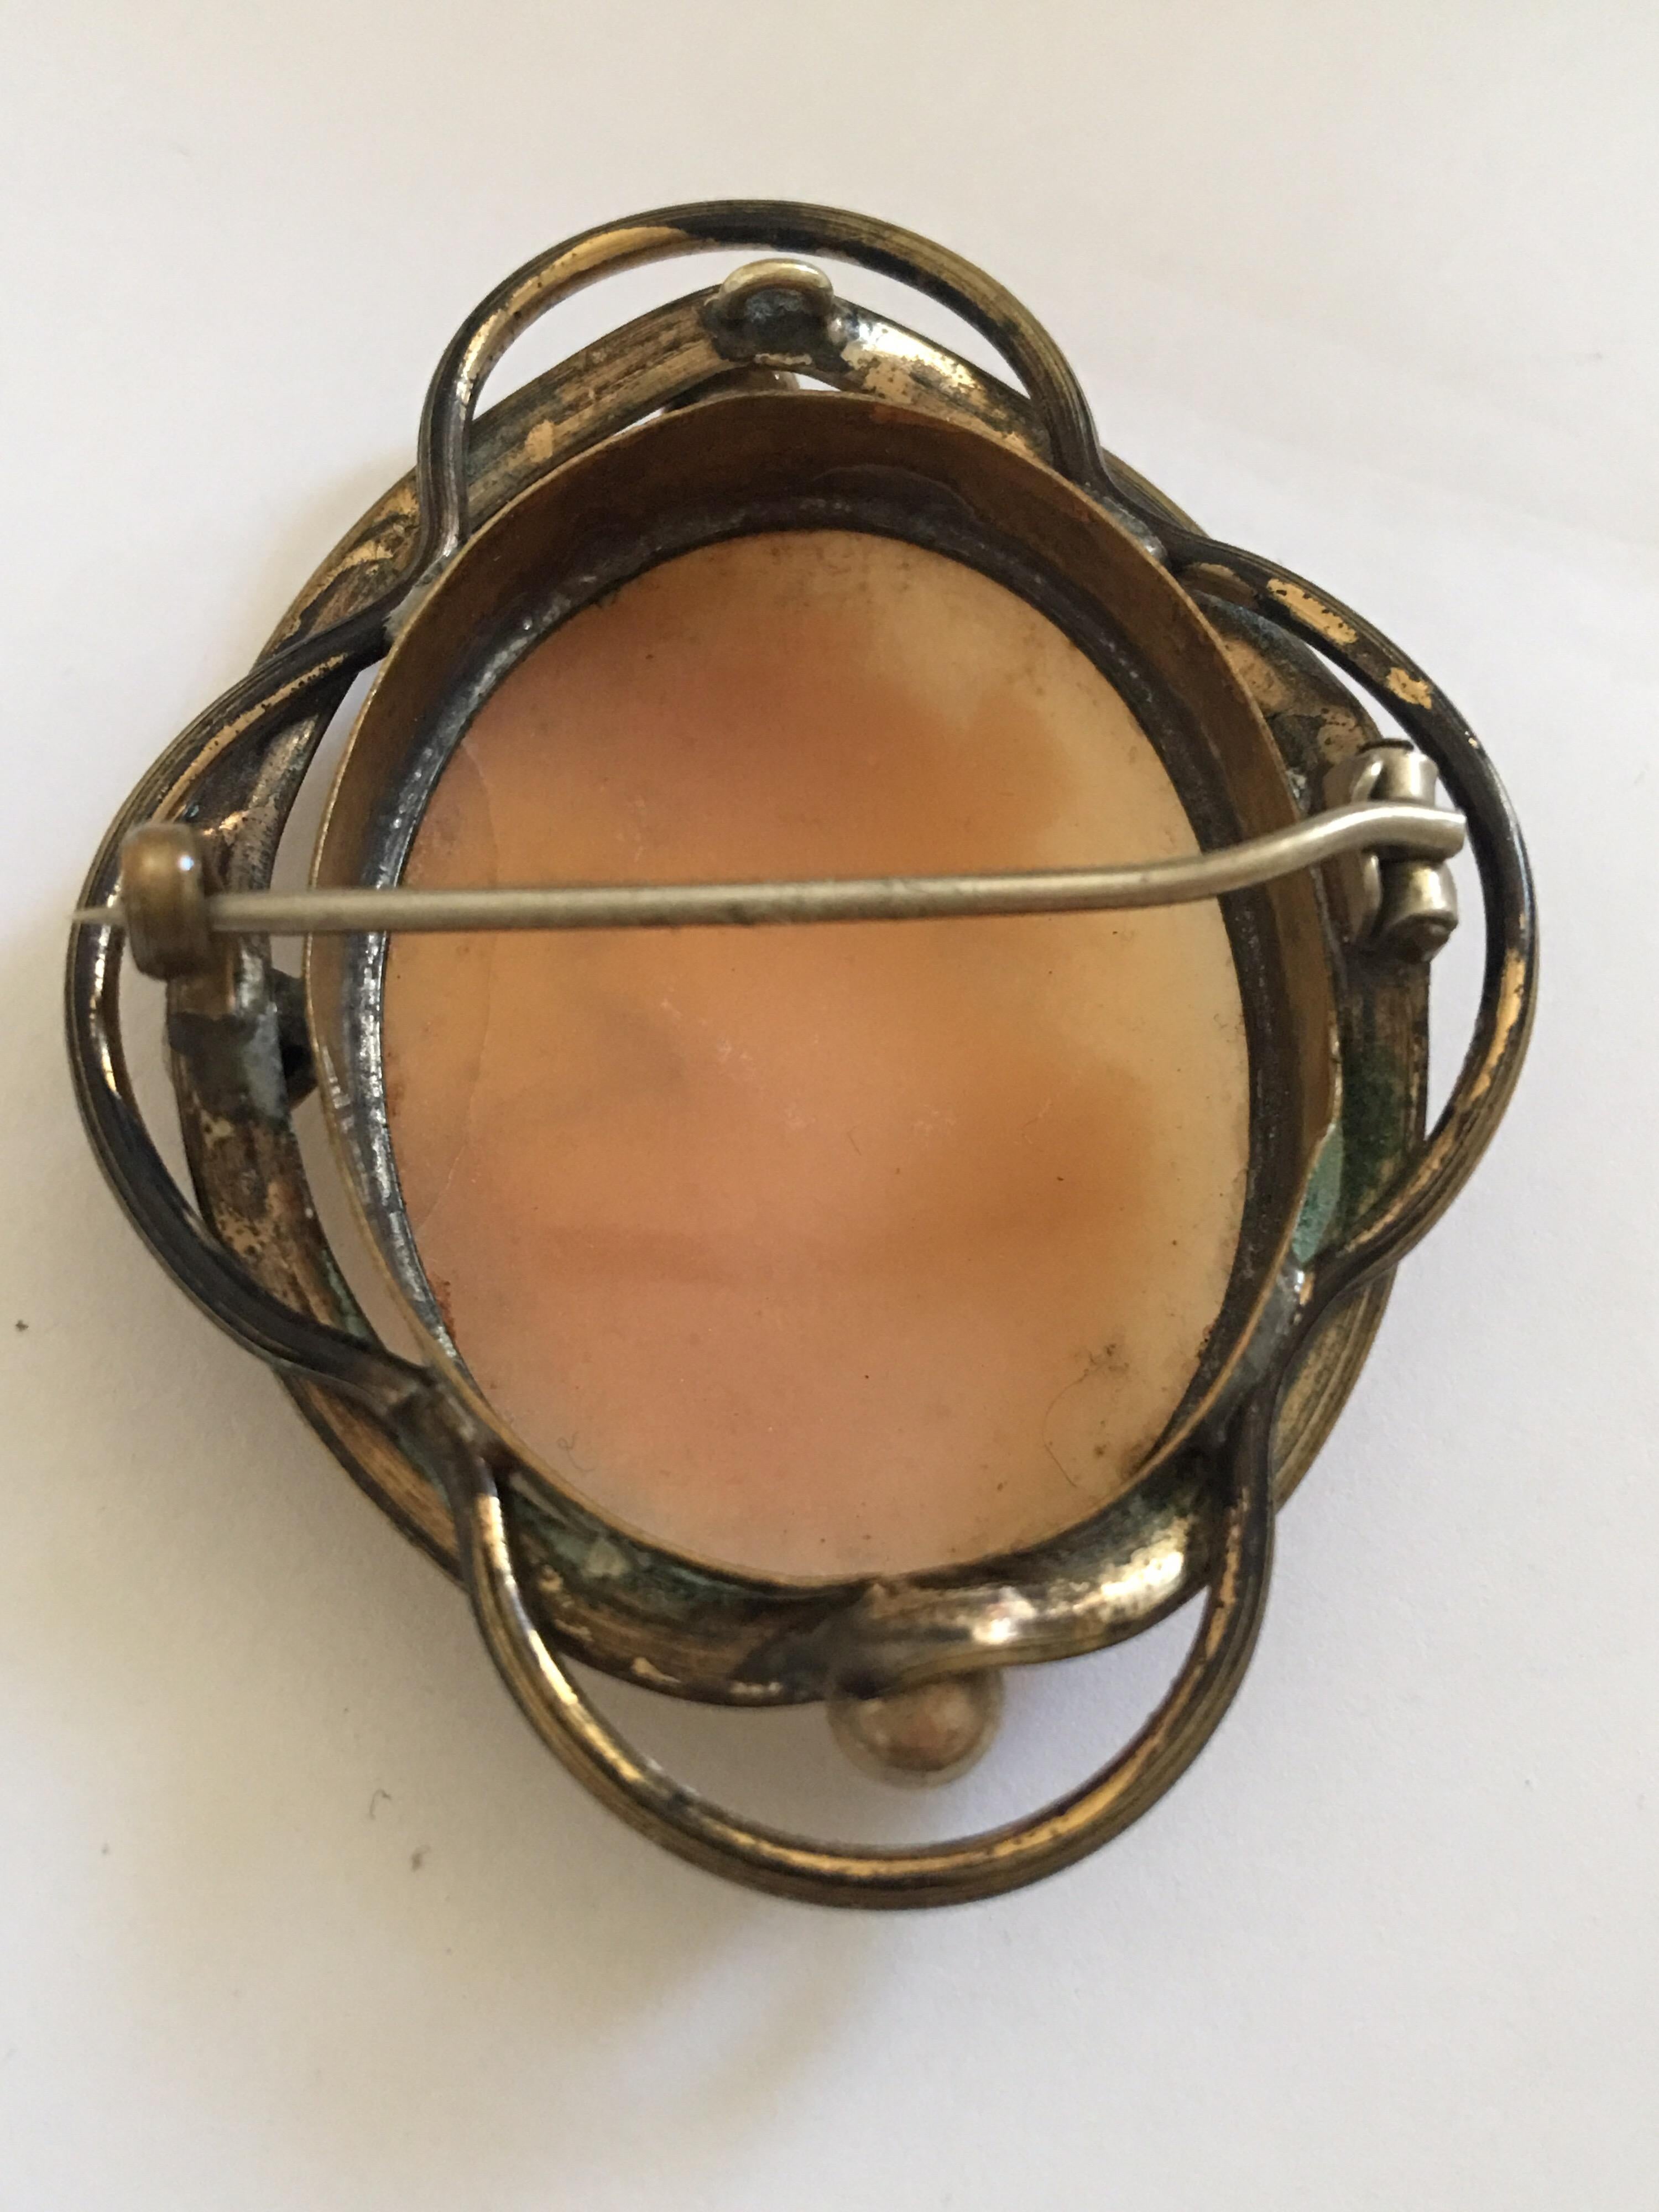 This beautiful Victoria Pendant / Brooch Cameo is in Fair condition. There is a visible cracks on the right hand side as shown. Please study the images carefully as form part of the description.